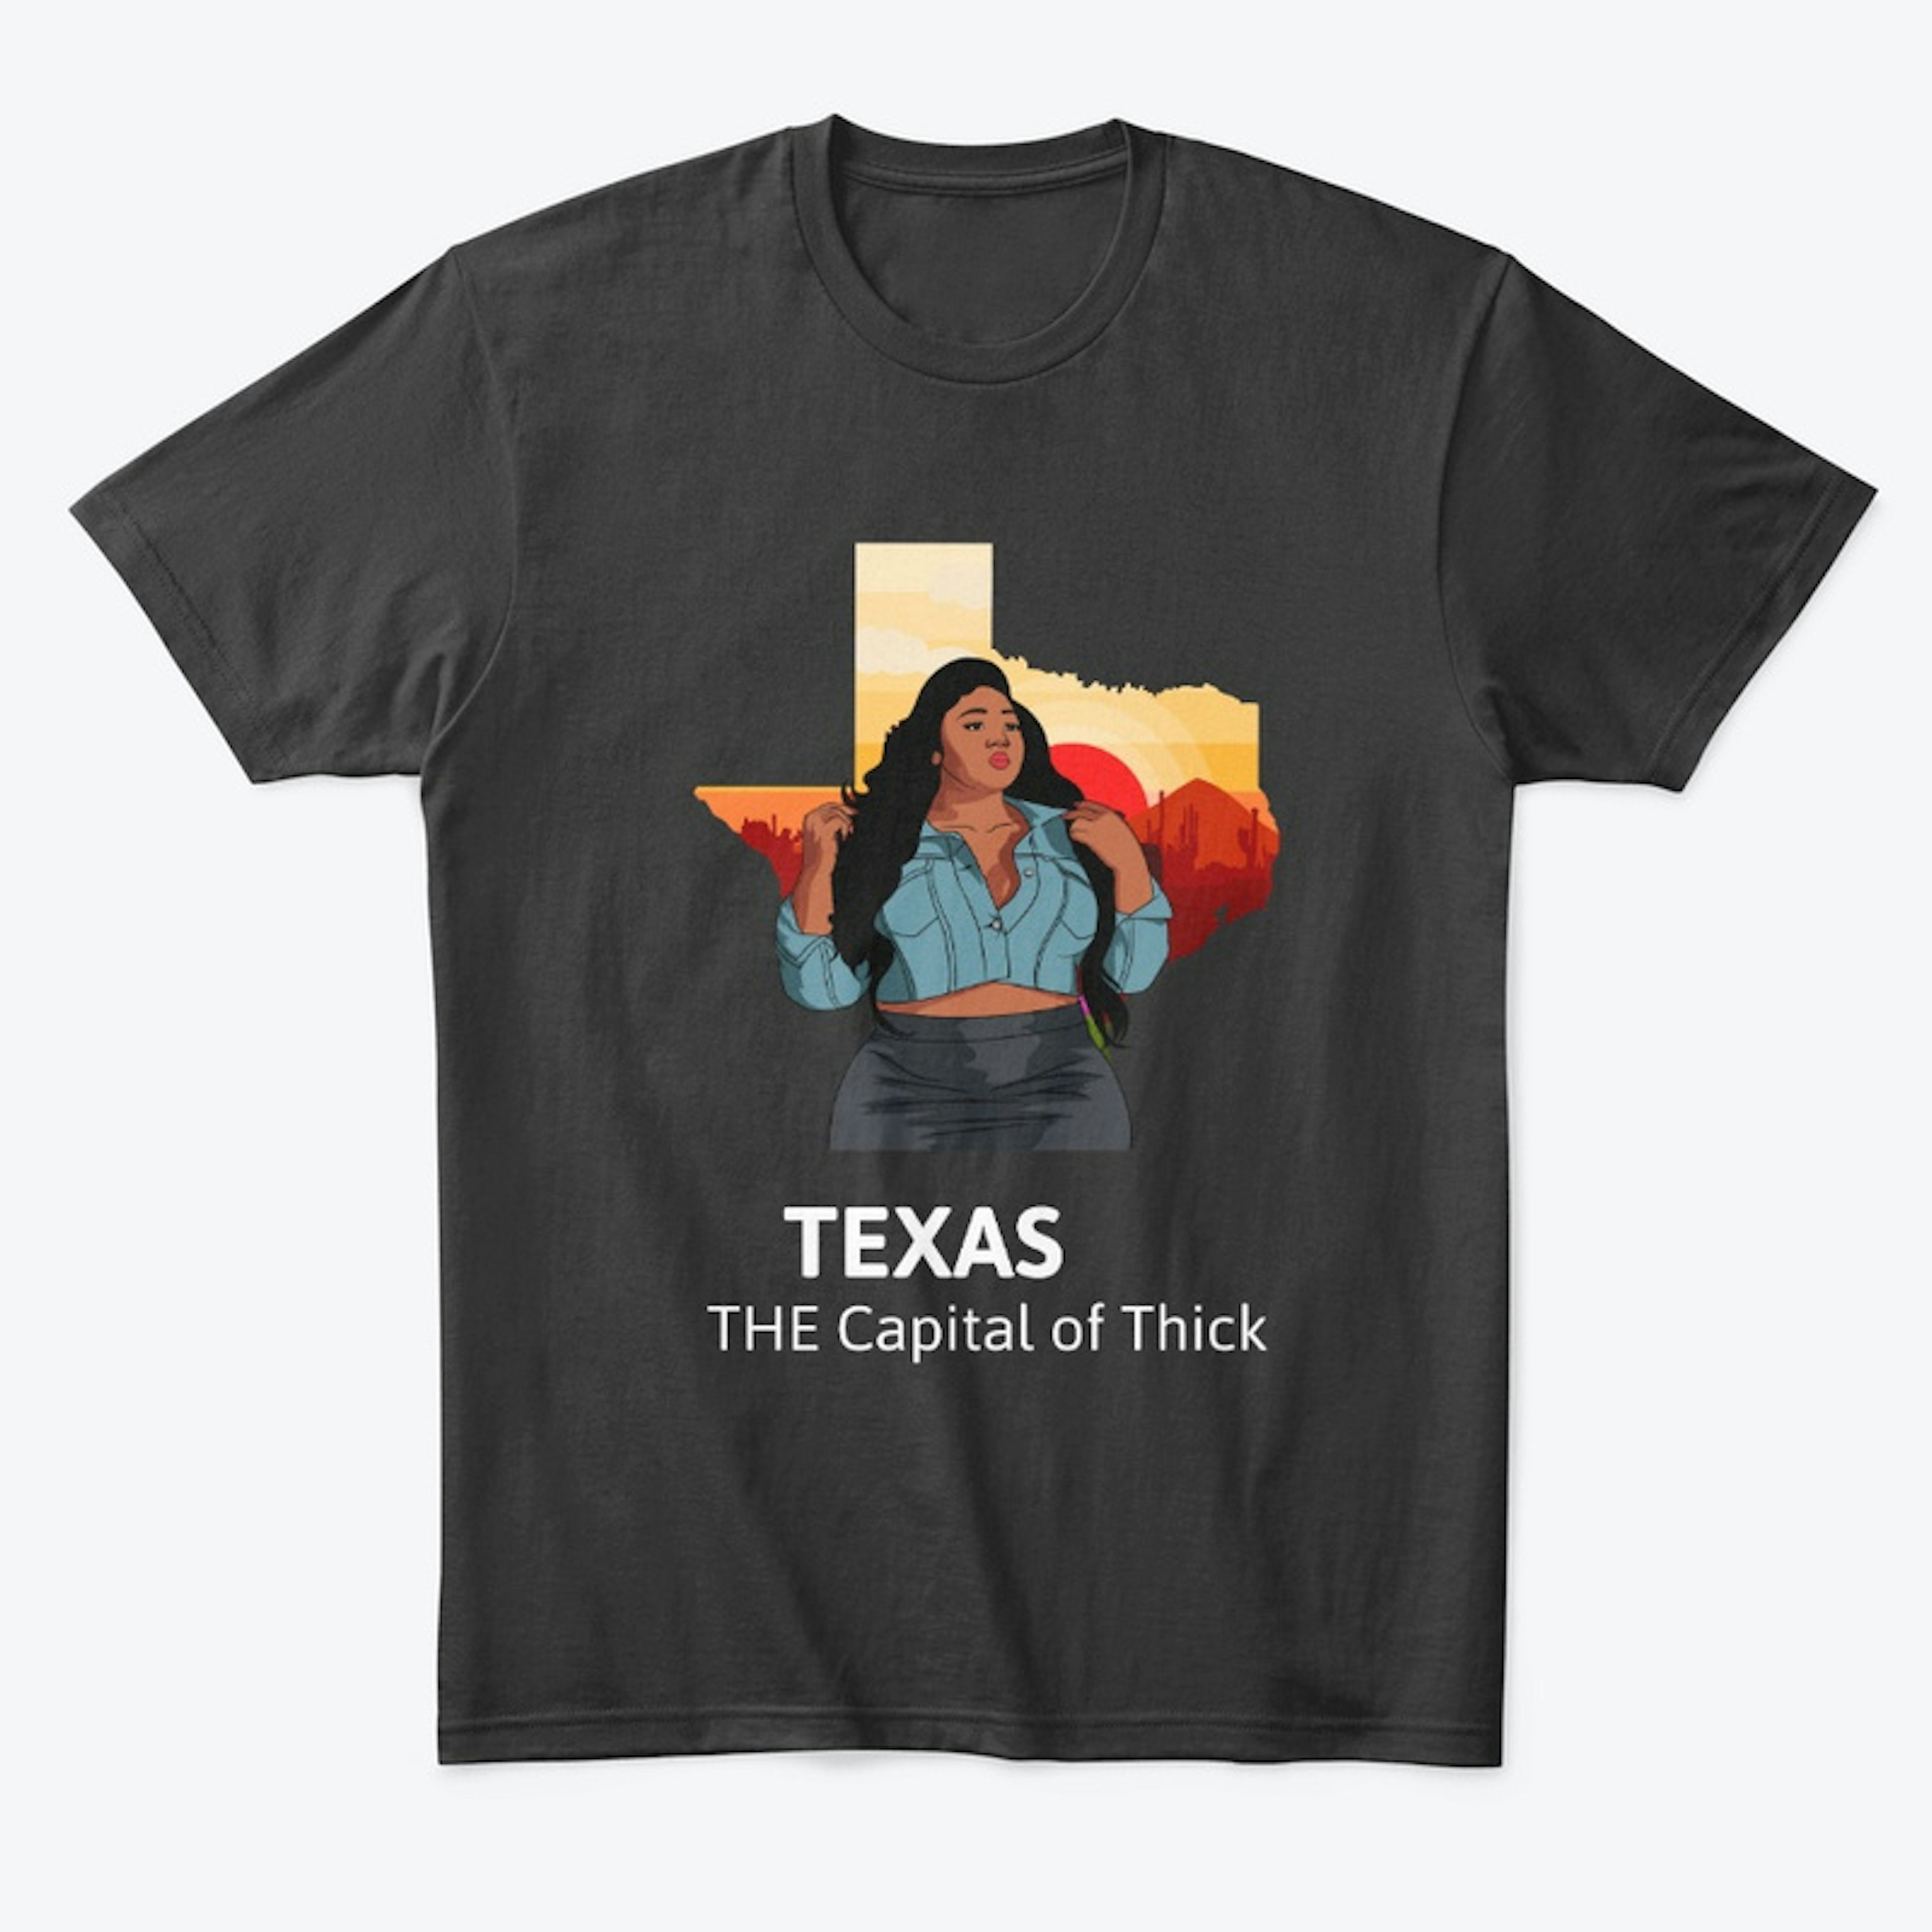 Texas - The Capital of Thick Plus Size